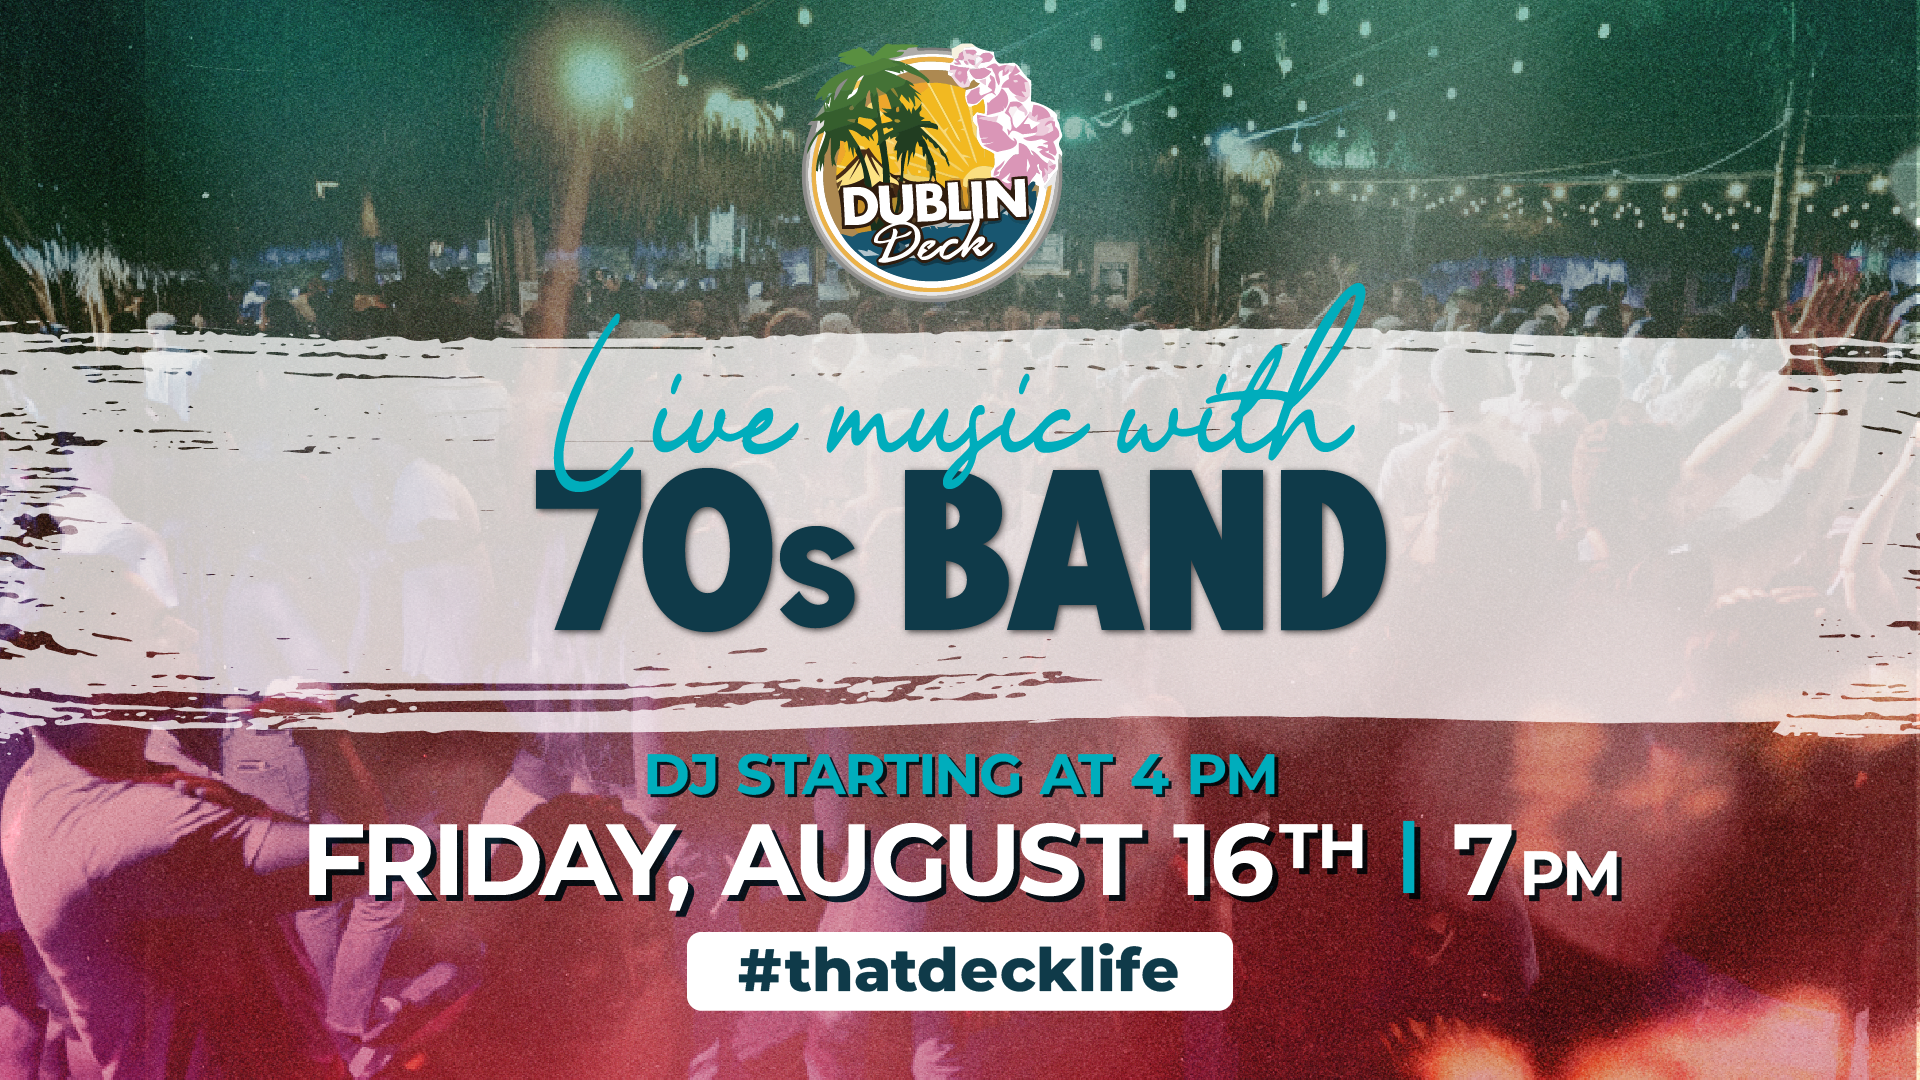 live music for august 16th at 7pm with a performance by 70's band